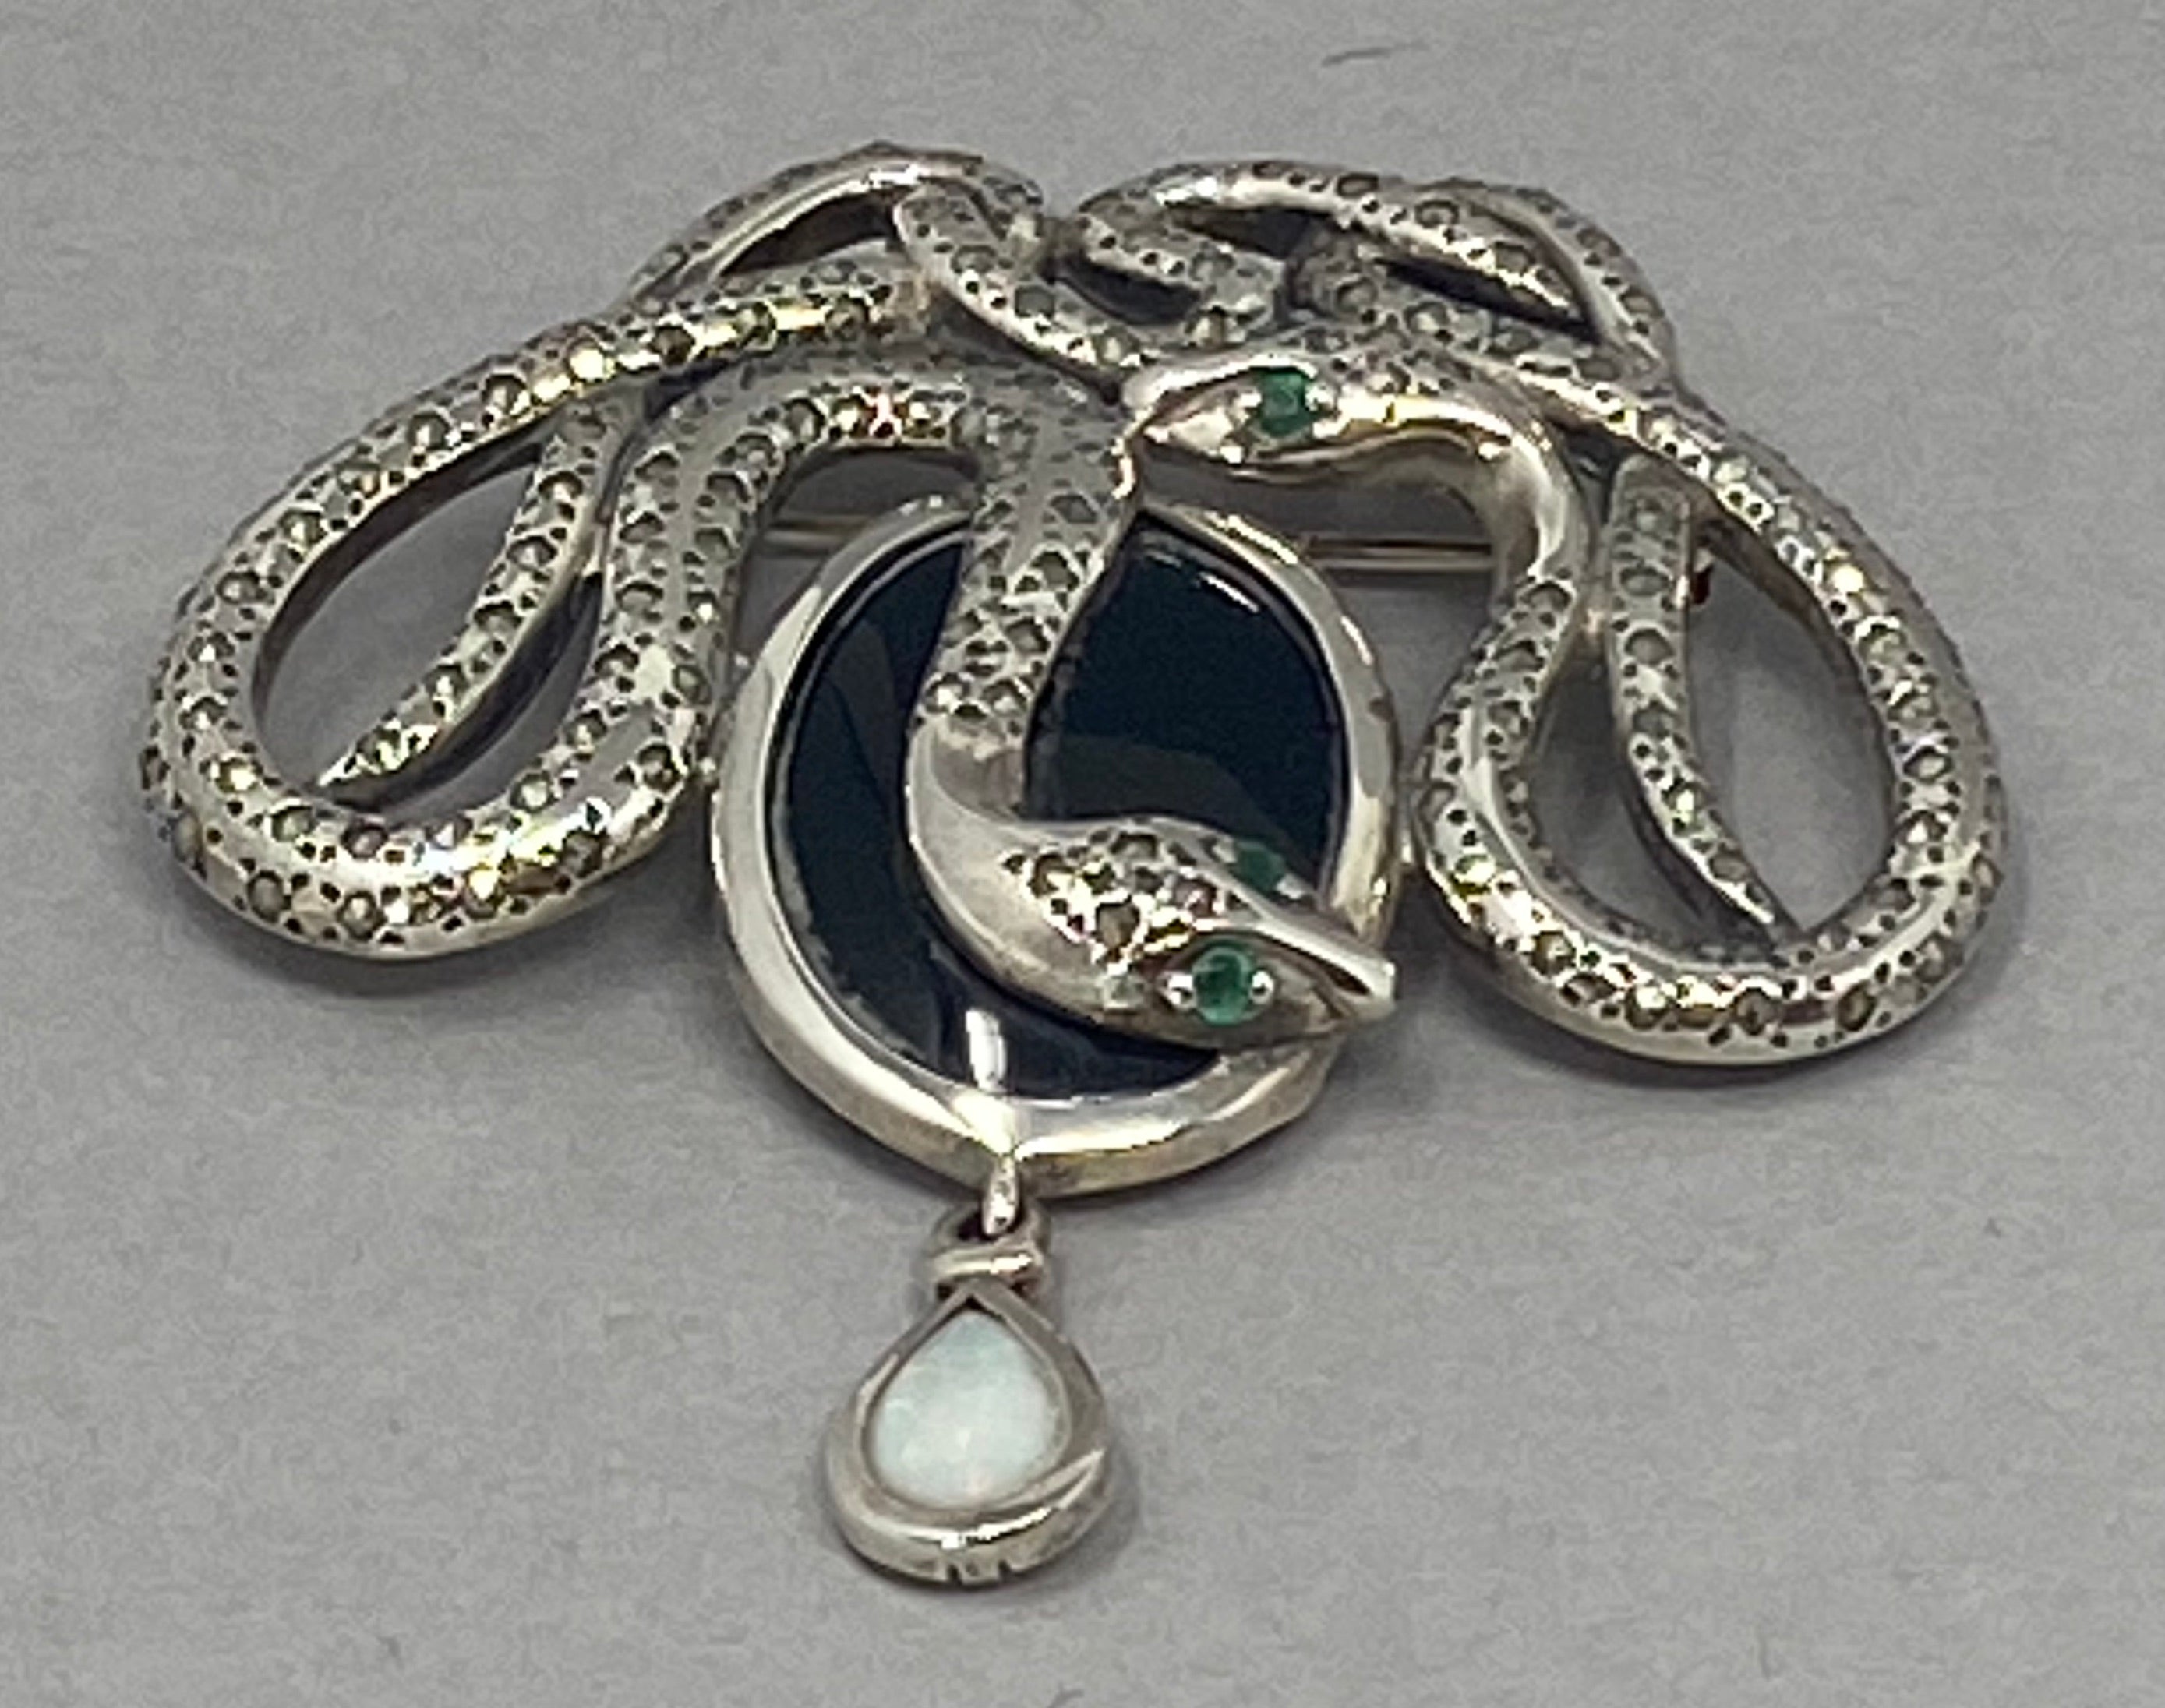 Silver Brooch with Snake Design